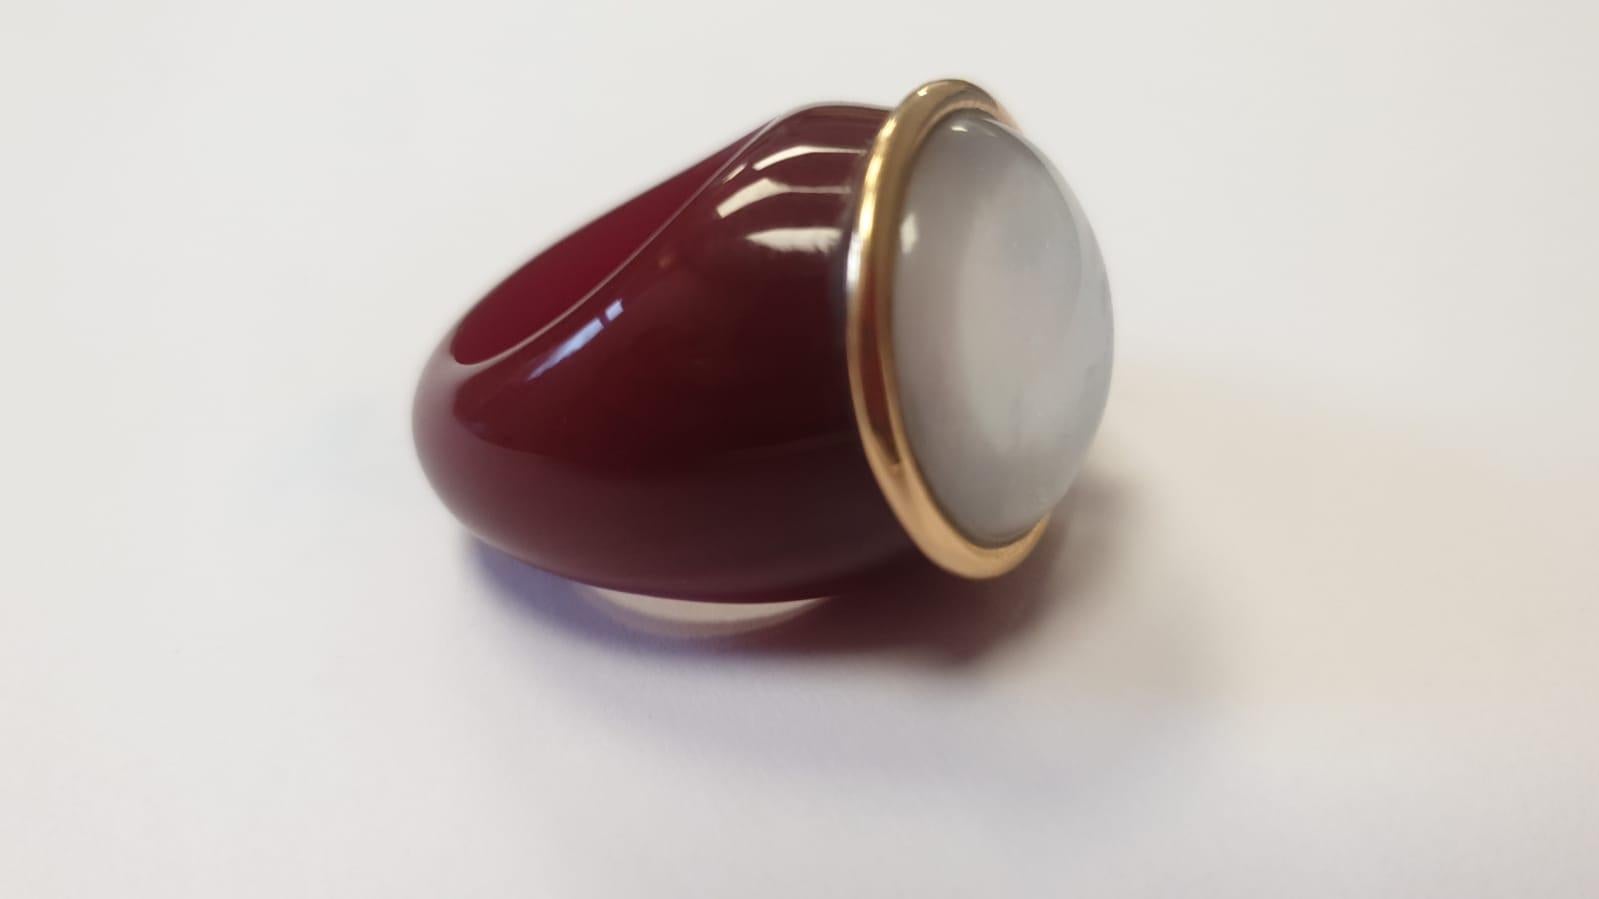 Elegant ring in bordeaux bakelite, 18kt pink gold and ialino quartz cabochon. 
Pink Gold g. 1,6
Round ialino quartz cabochon size 18  mm
Size 14 (ita) 6.75 (usa)  54 (fra) 

